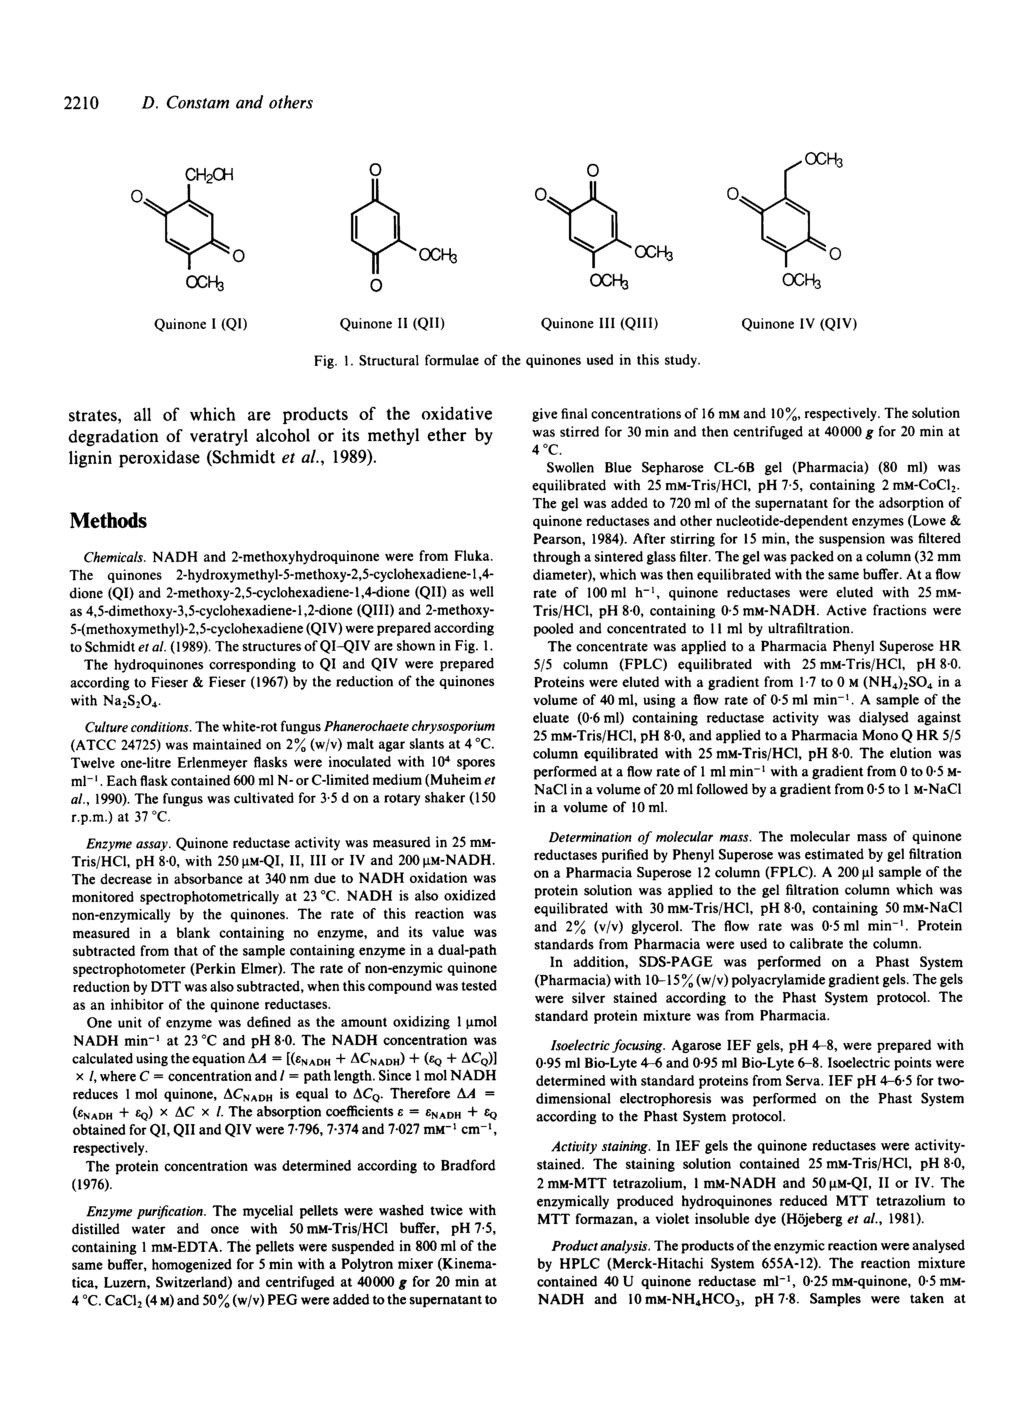 2210 D. Constam and others 0 0 f E H3 Quinone I (QI) Quinone I1 (QII) Quinone 111 (QIII) Quinone IV (QIV) Fig. 1. Structural formulae of the quinones used in this study.